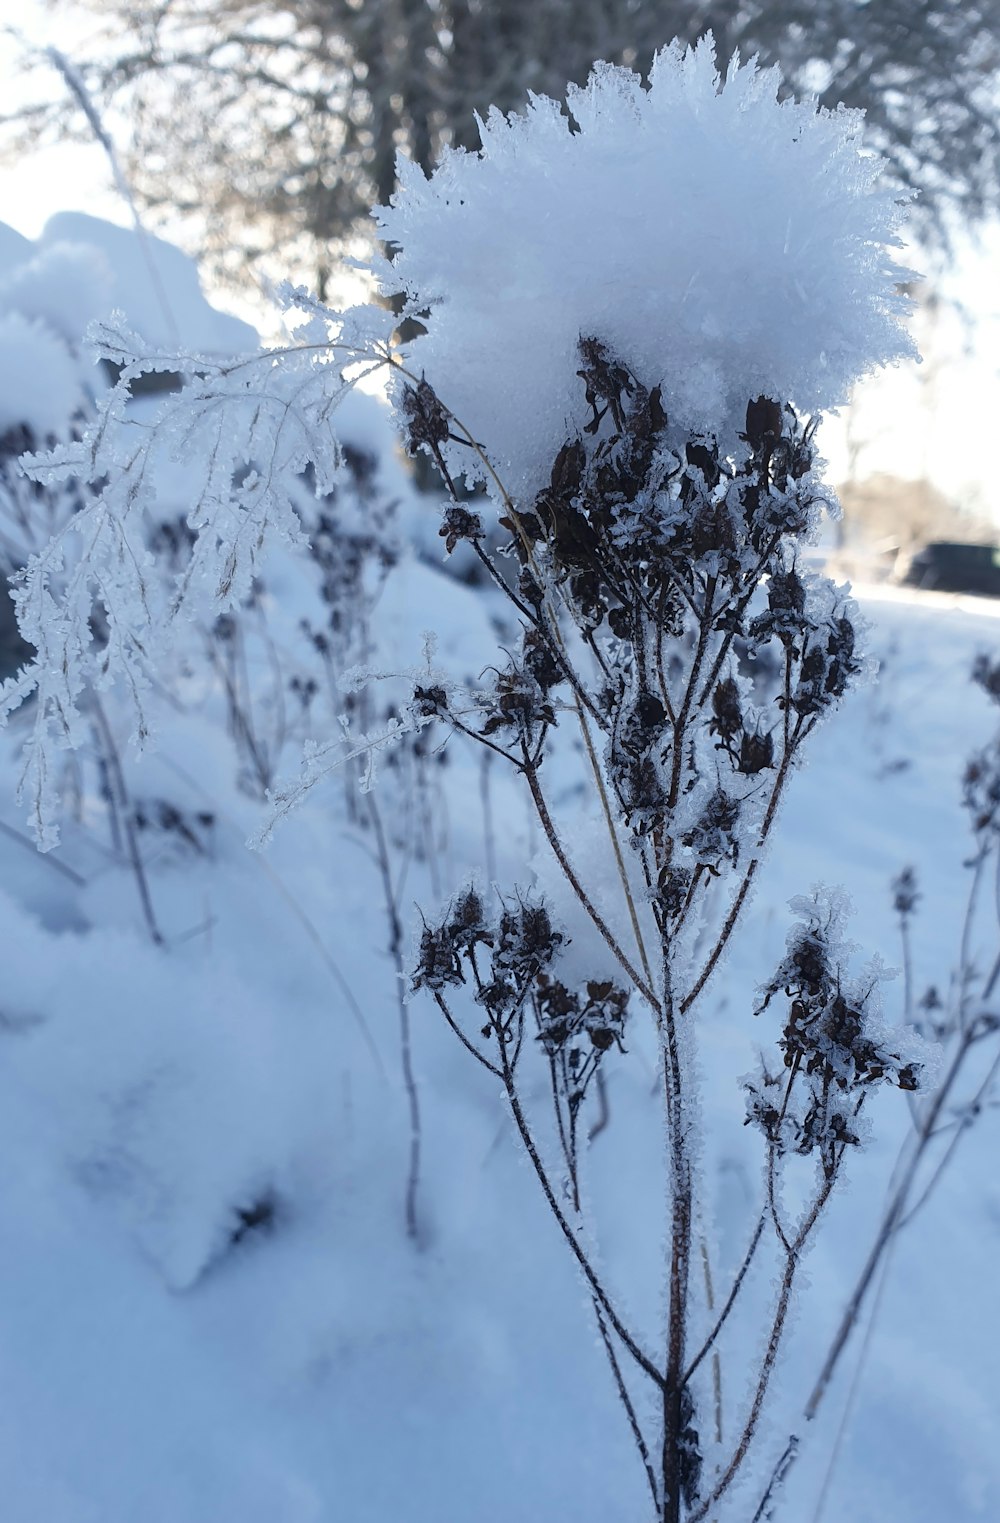 a snow covered plant in the middle of a snowy field